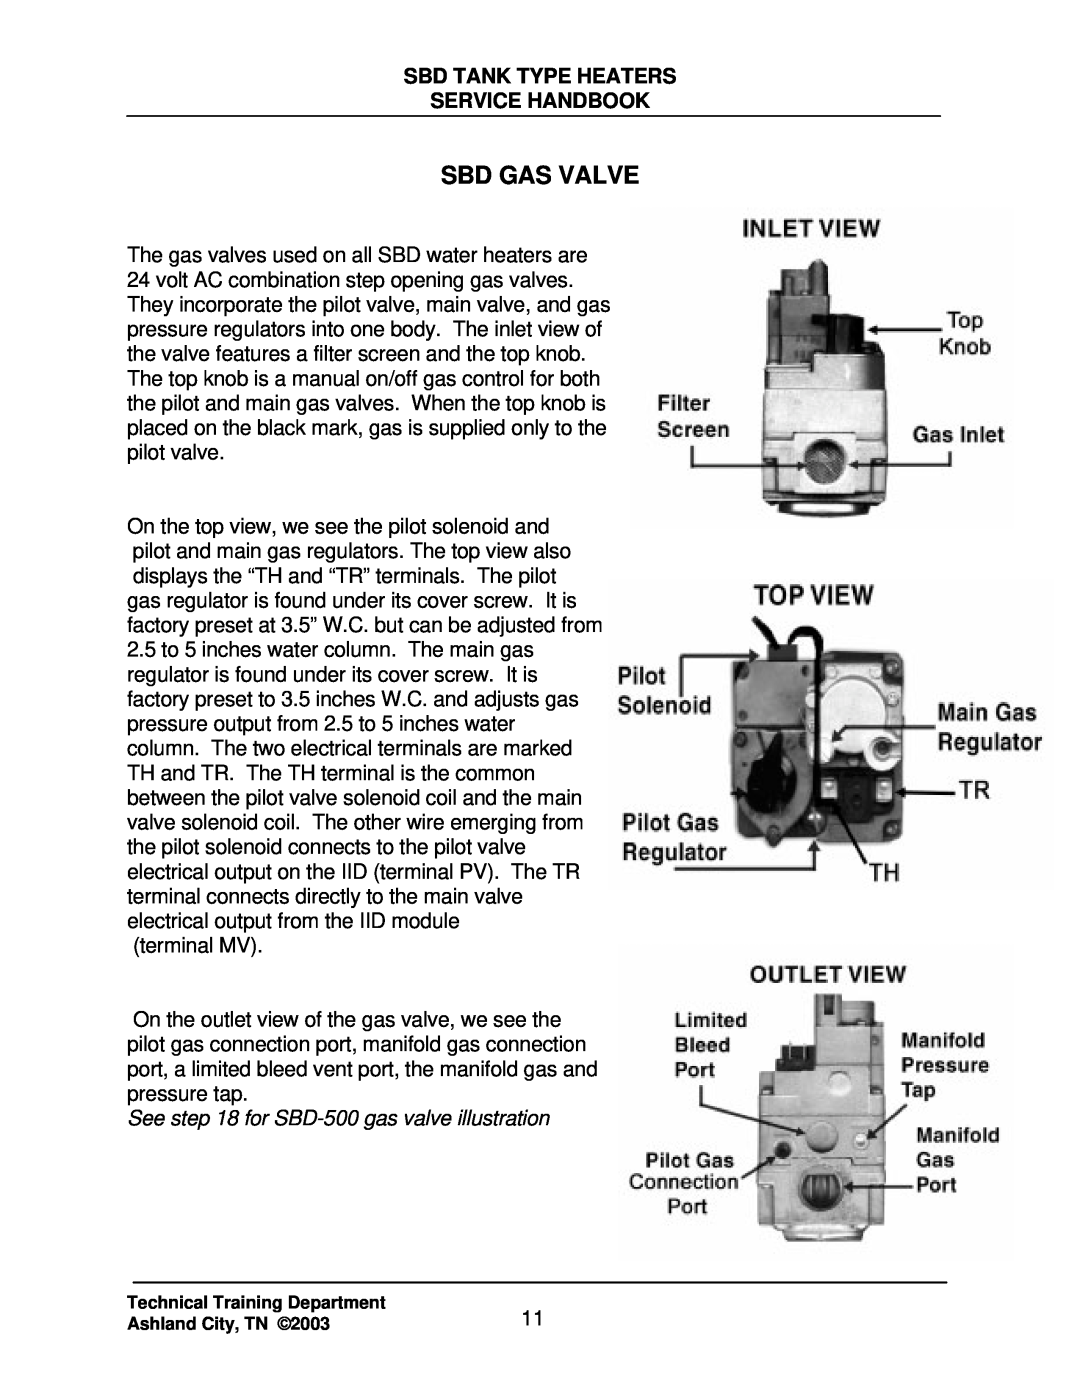 State Industries SBD85 500 Sbd Gas Valve, Sbd Tank Type Heaters Service Handbook, See for SBD-500gas valve illustration 